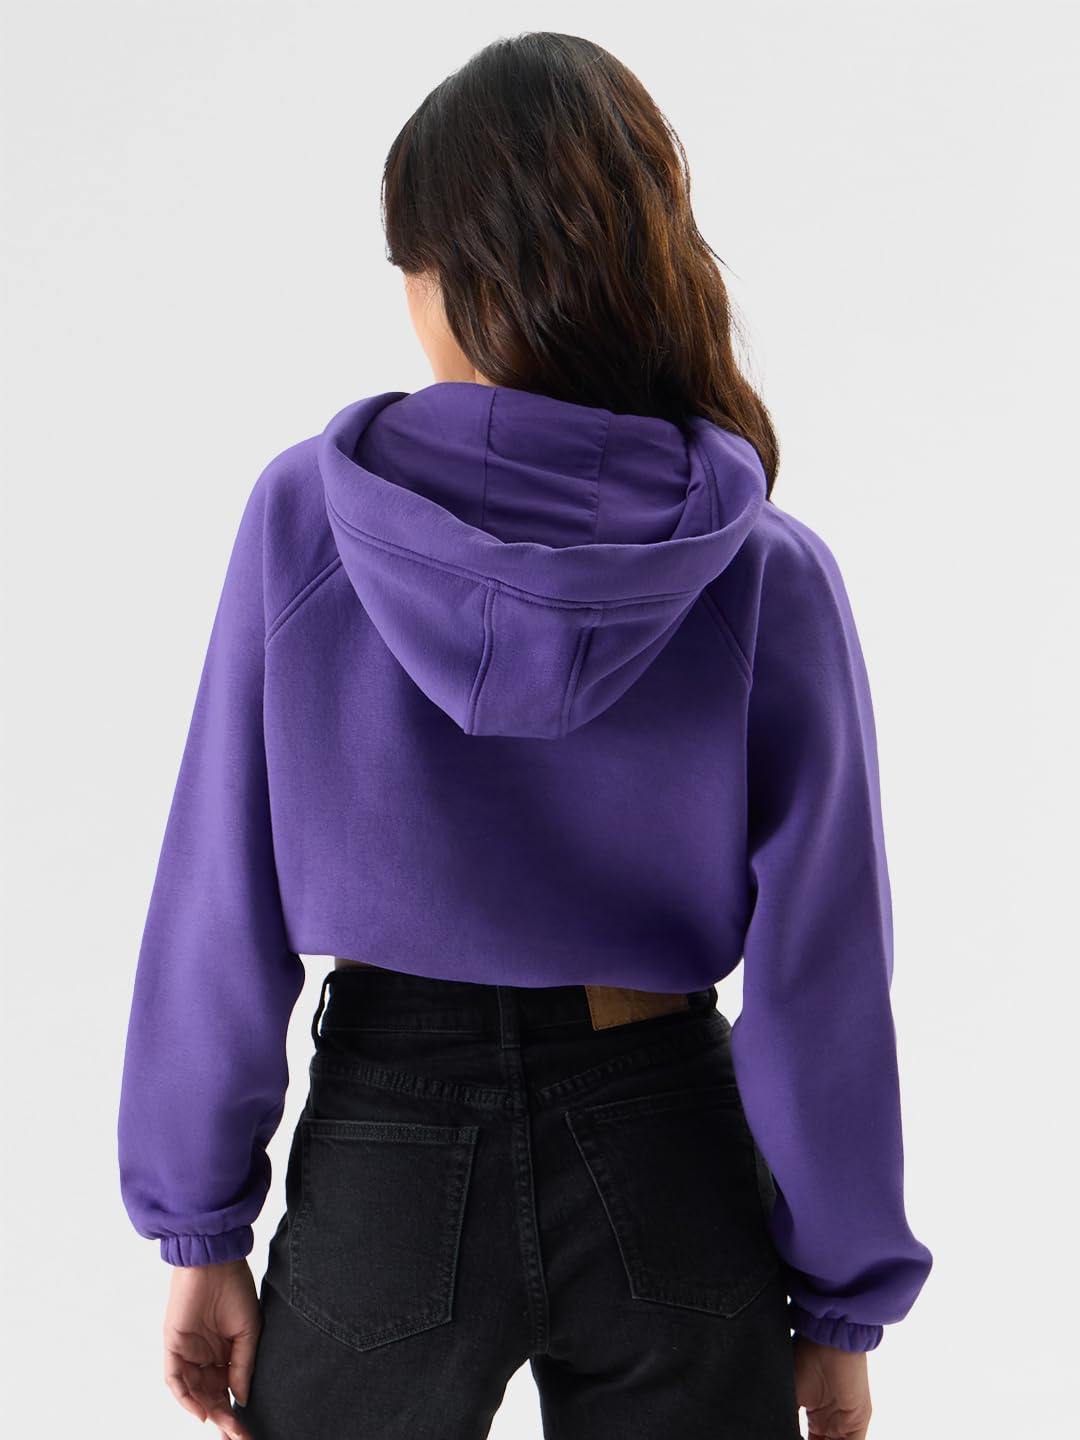 The Souled Store Violet Hoodie Women Oversized Hoodies Sweatshirts Hoodies Pullovers Crewneck Hooded Zip-Up Graphic Printed Solid Color Block Sportswear Casual Warm Cozy Comfortable Winter Fall